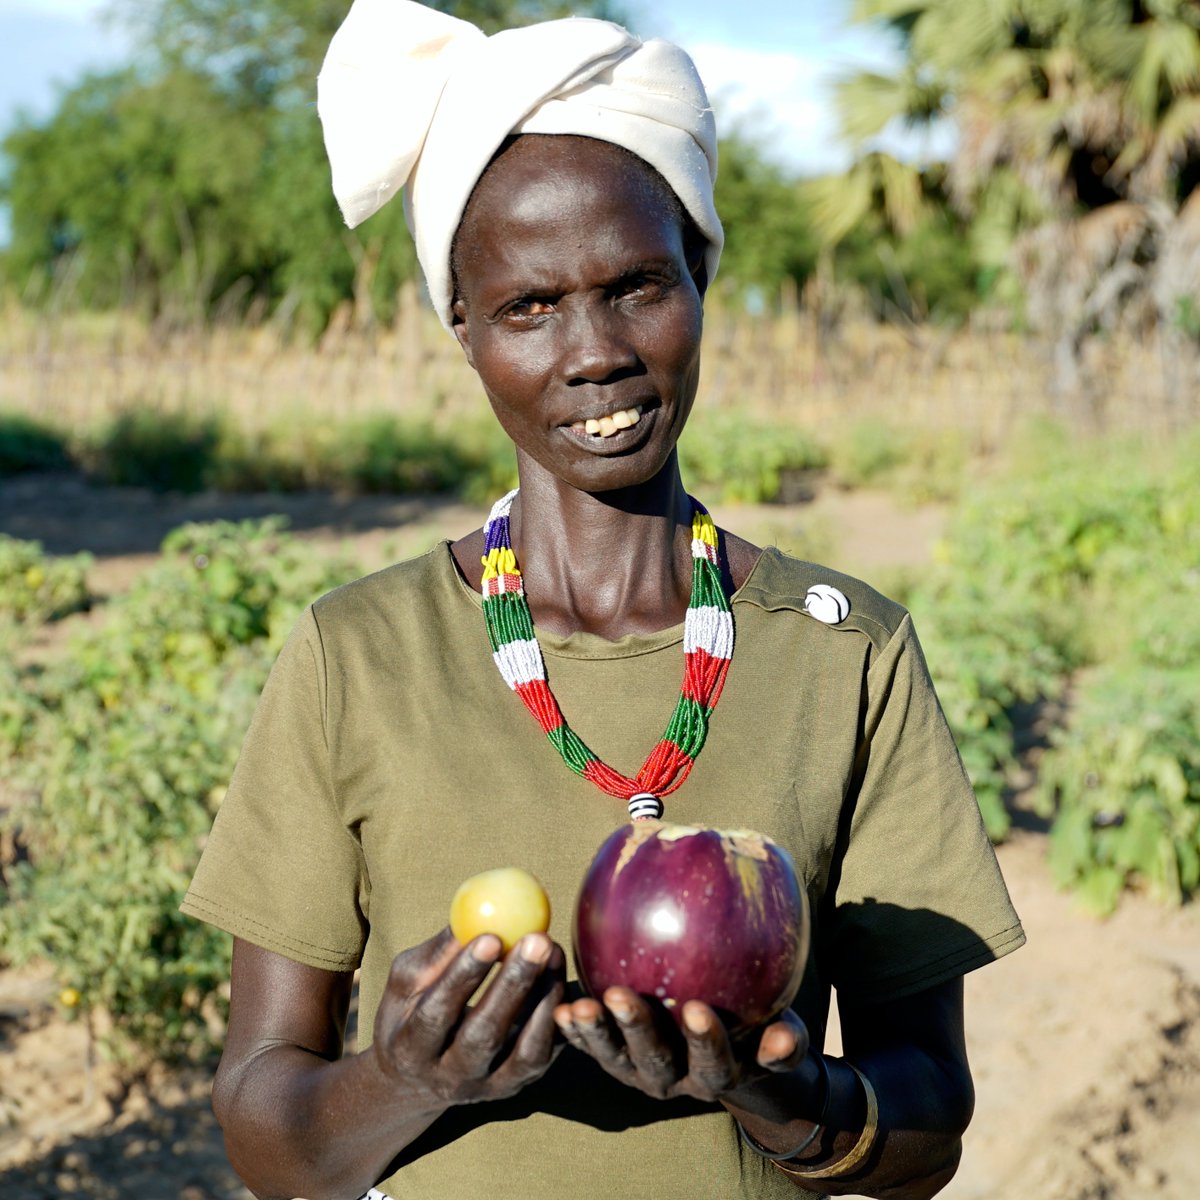 With vegetable gardens, participants of @WFP's resilience programs: ✅receive cash & trainings ✅cultivate their own food ✅can sell their produce for additional income Thank you @CanSouthSudan 🇨🇦 for being a long-standing supporter of WFP's resilience programs in #SouthSudan